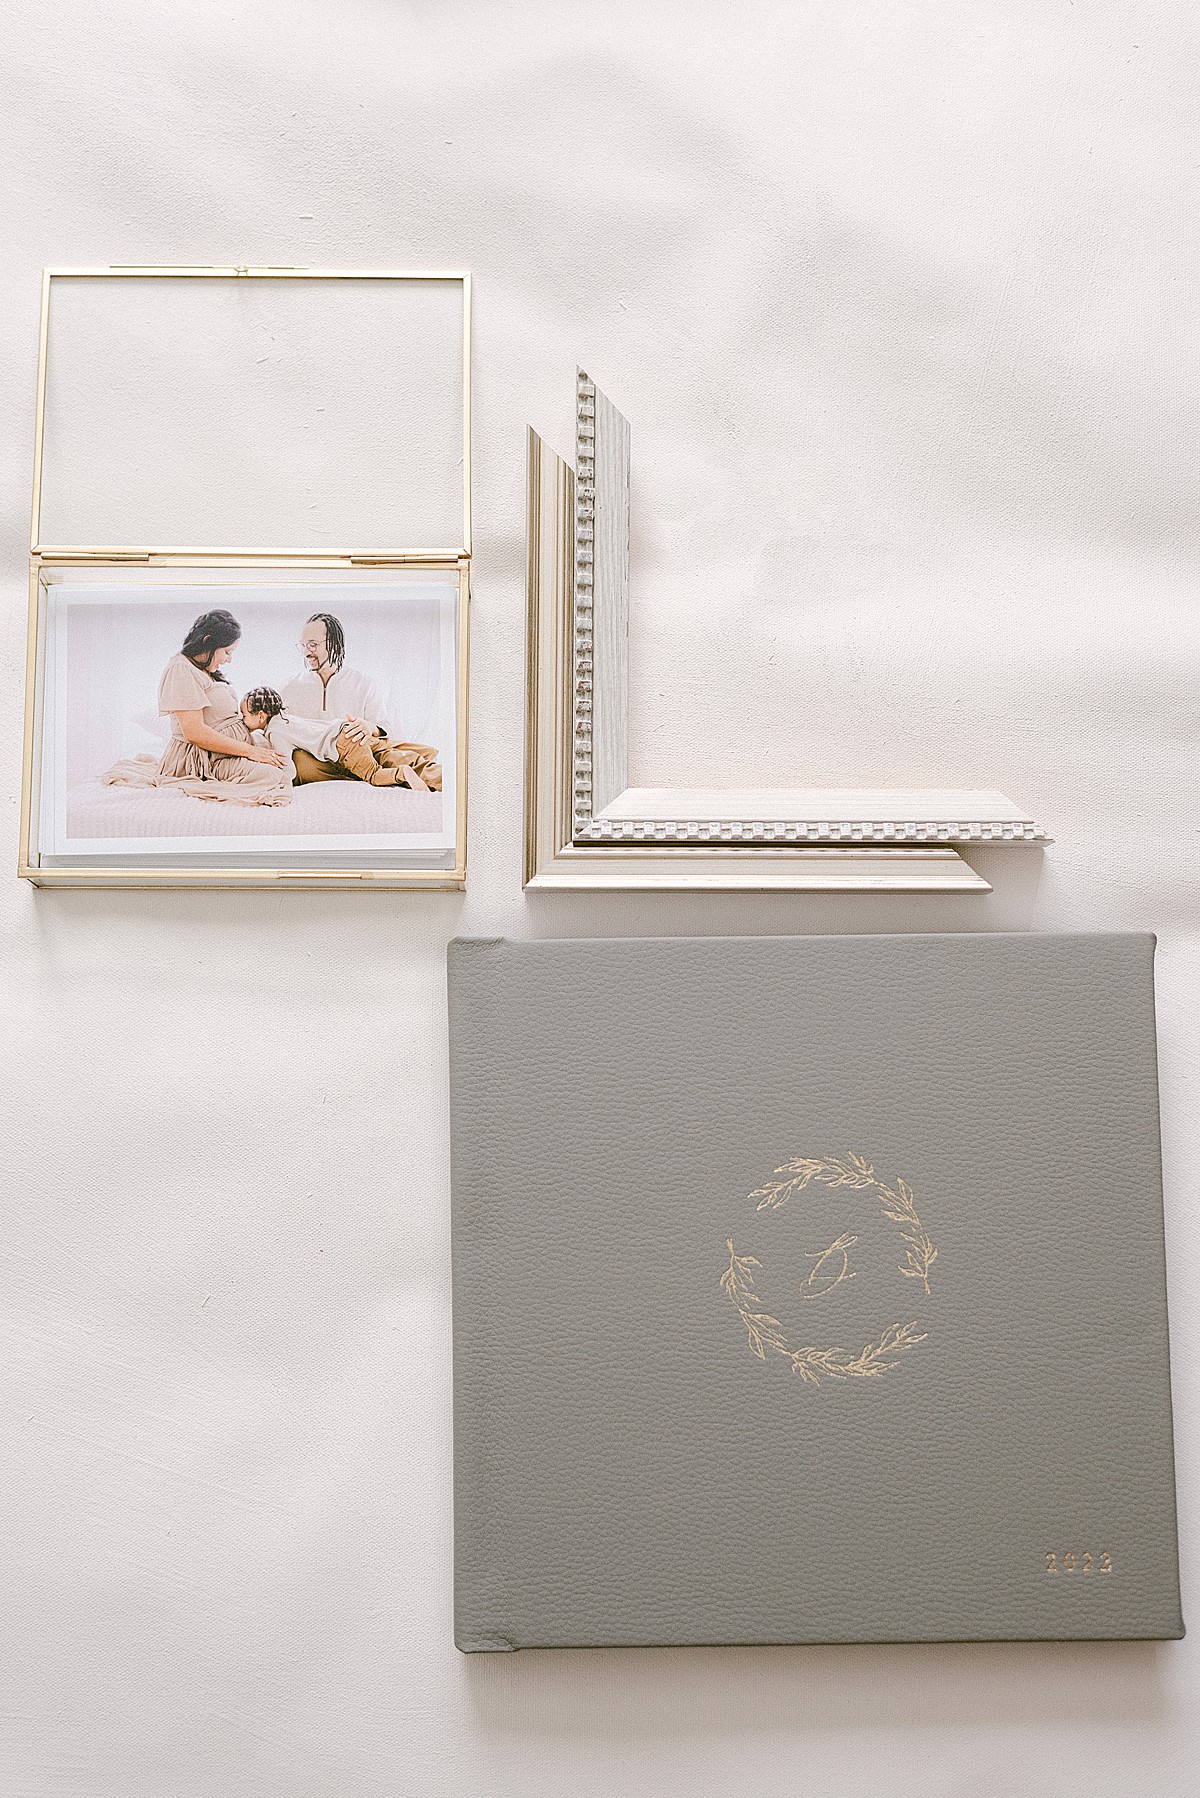 printed proofs in gold glass keepsake box next to heirloom album and frame moldings designed by scottsdale az photographer